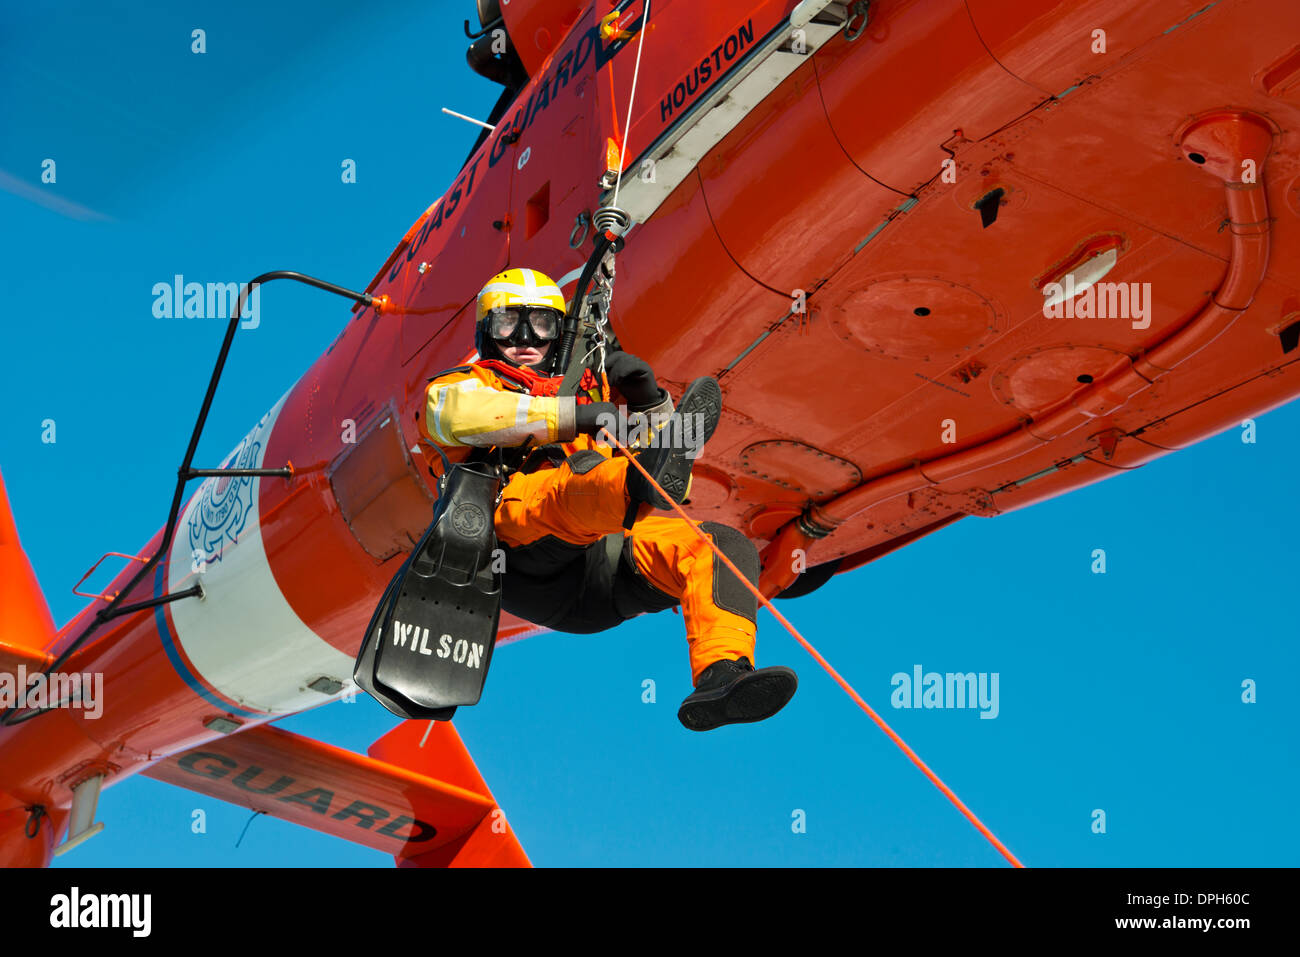 US Coast Guard Petty Officer 3rd Class Andrew Wilson, a rescue swimmer with Air Station Houston is lowered to a small boat in Galveston Bay during training January 9, 2014 in Galveston, Texas. Stock Photo